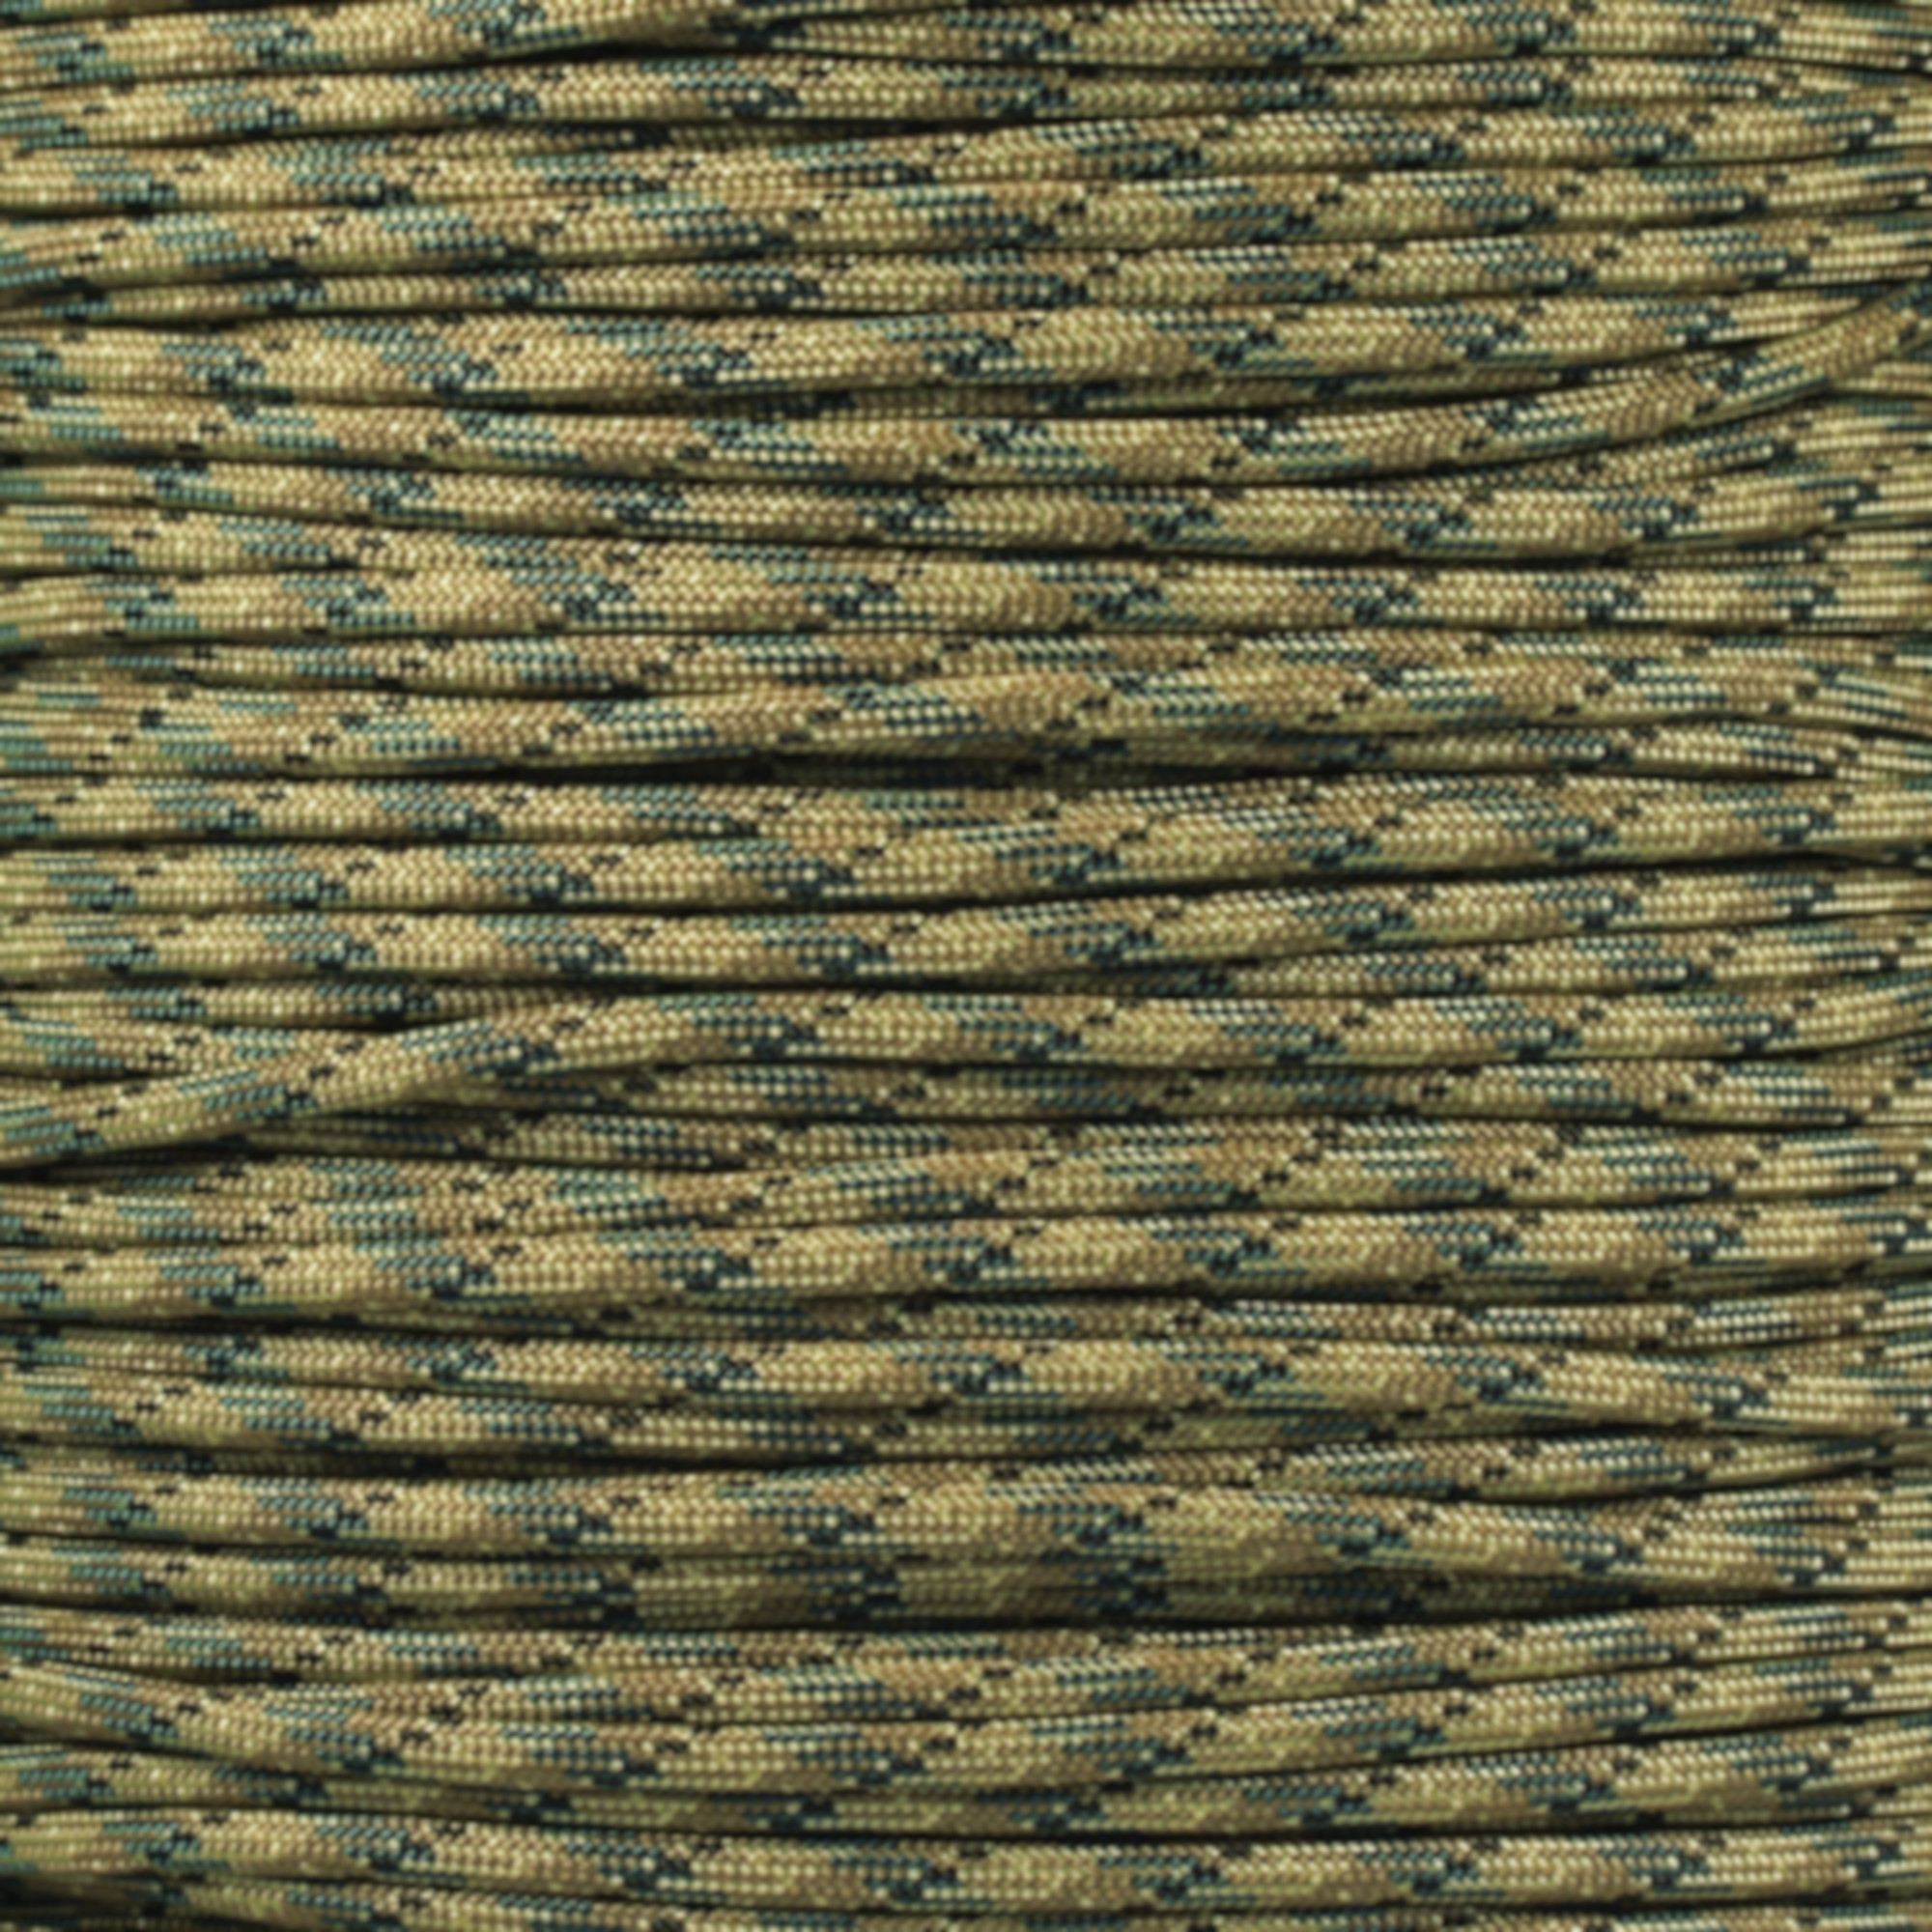 Paracord Planet WindIt Wizard with 100 Feet of 550 Paracord in Camo and Outdoor Colors - Store and Organize Parachute Cord with NO KNOTS OR TANGLES - image 2 of 5